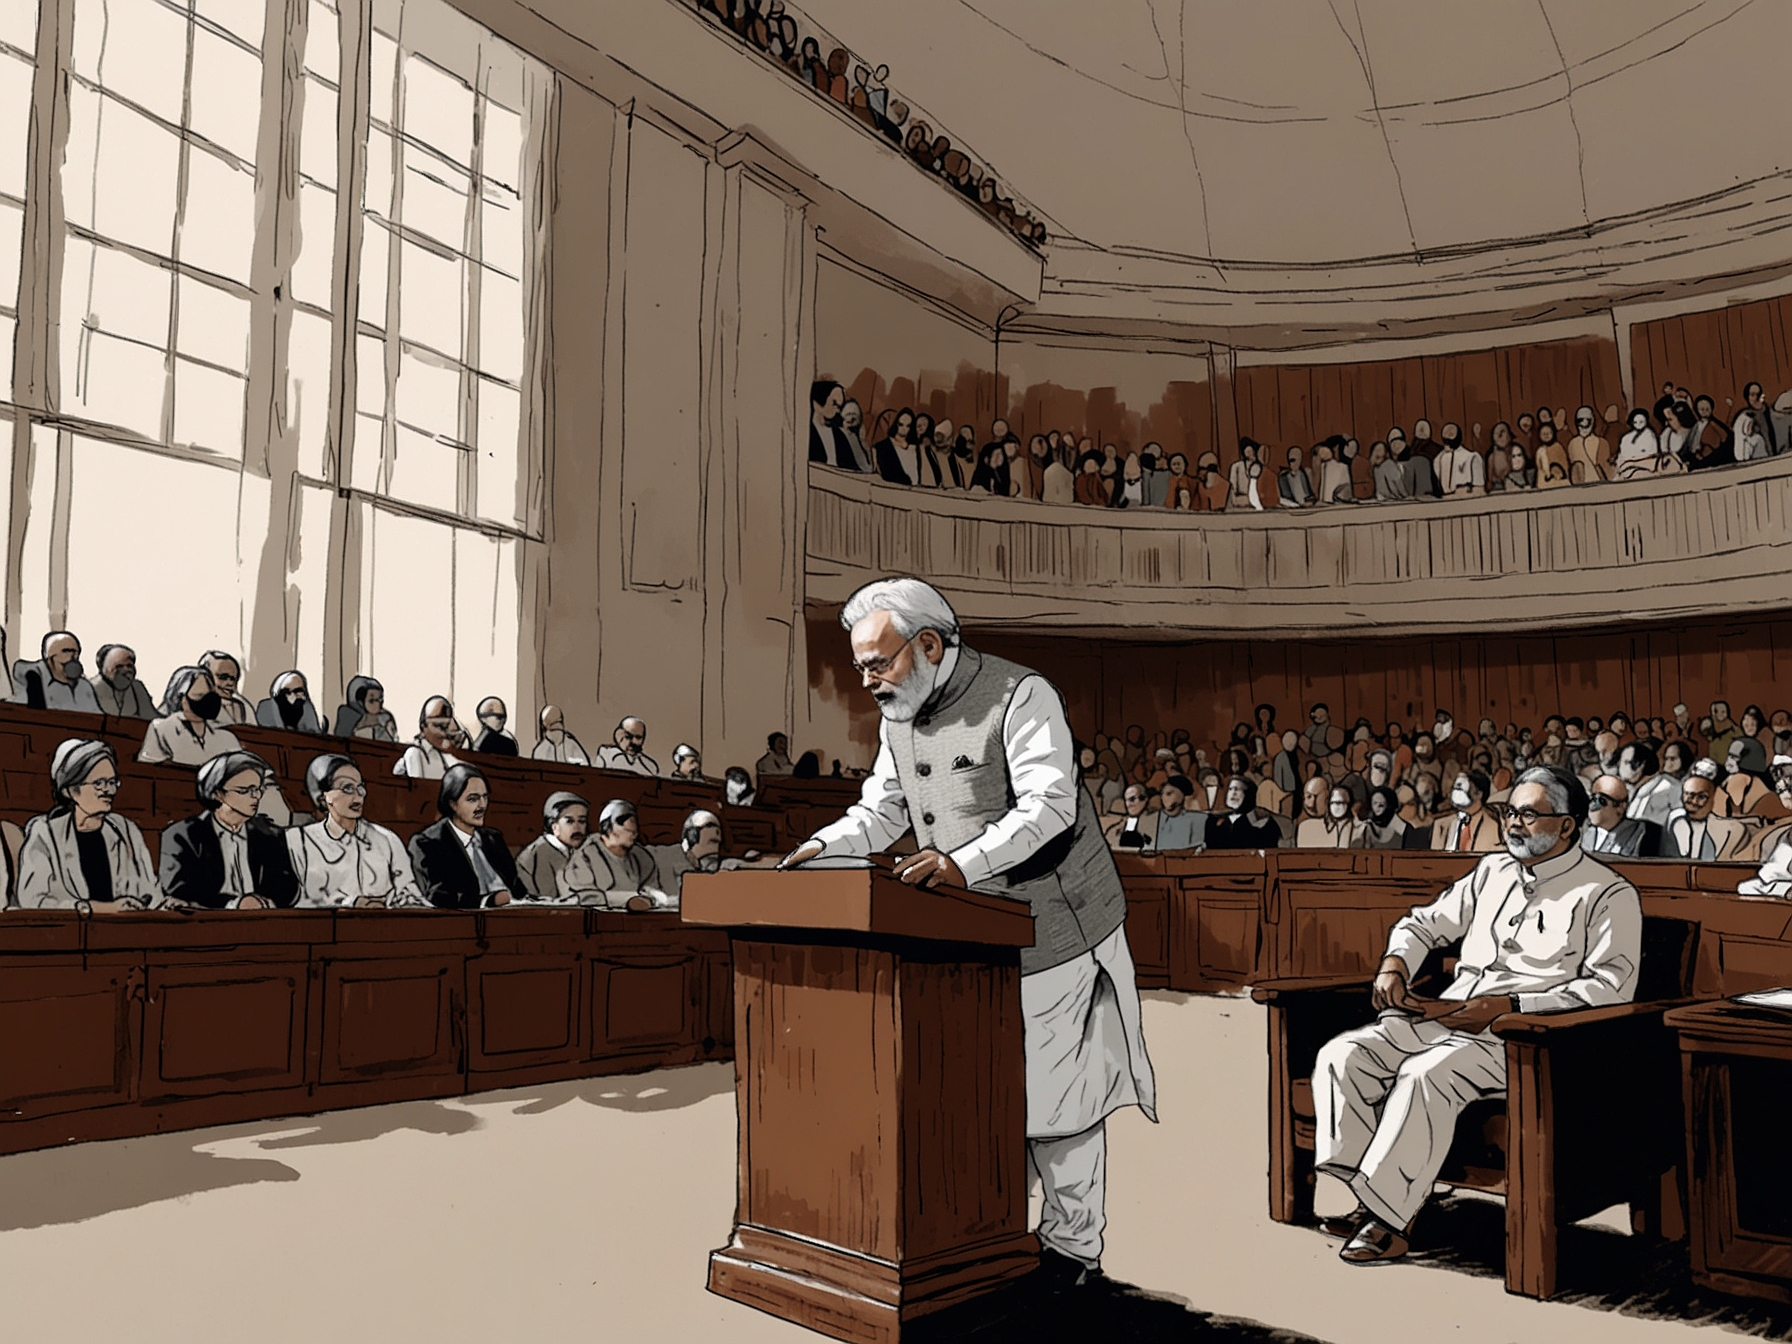 Prime Minister Narendra Modi addressing the Parliament, emphasizing the need for bipartisan cooperation against the backdrop of ongoing political divisions and procedural disruptions.